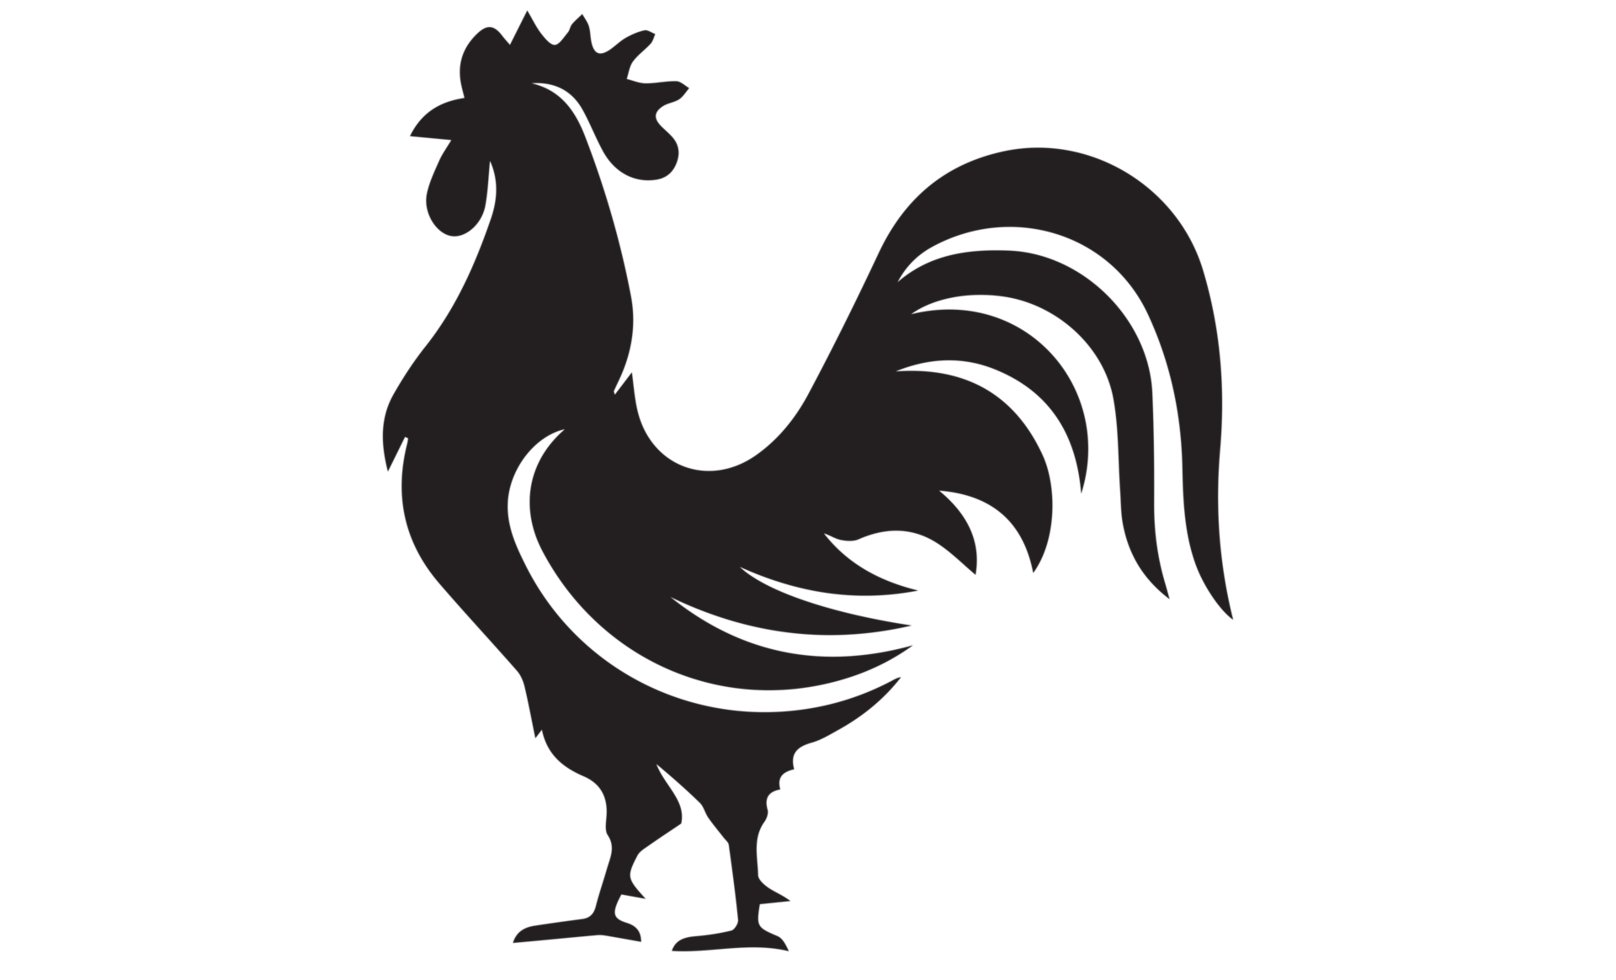 Rooster - Hen - Chicken icon png on Transparent Background